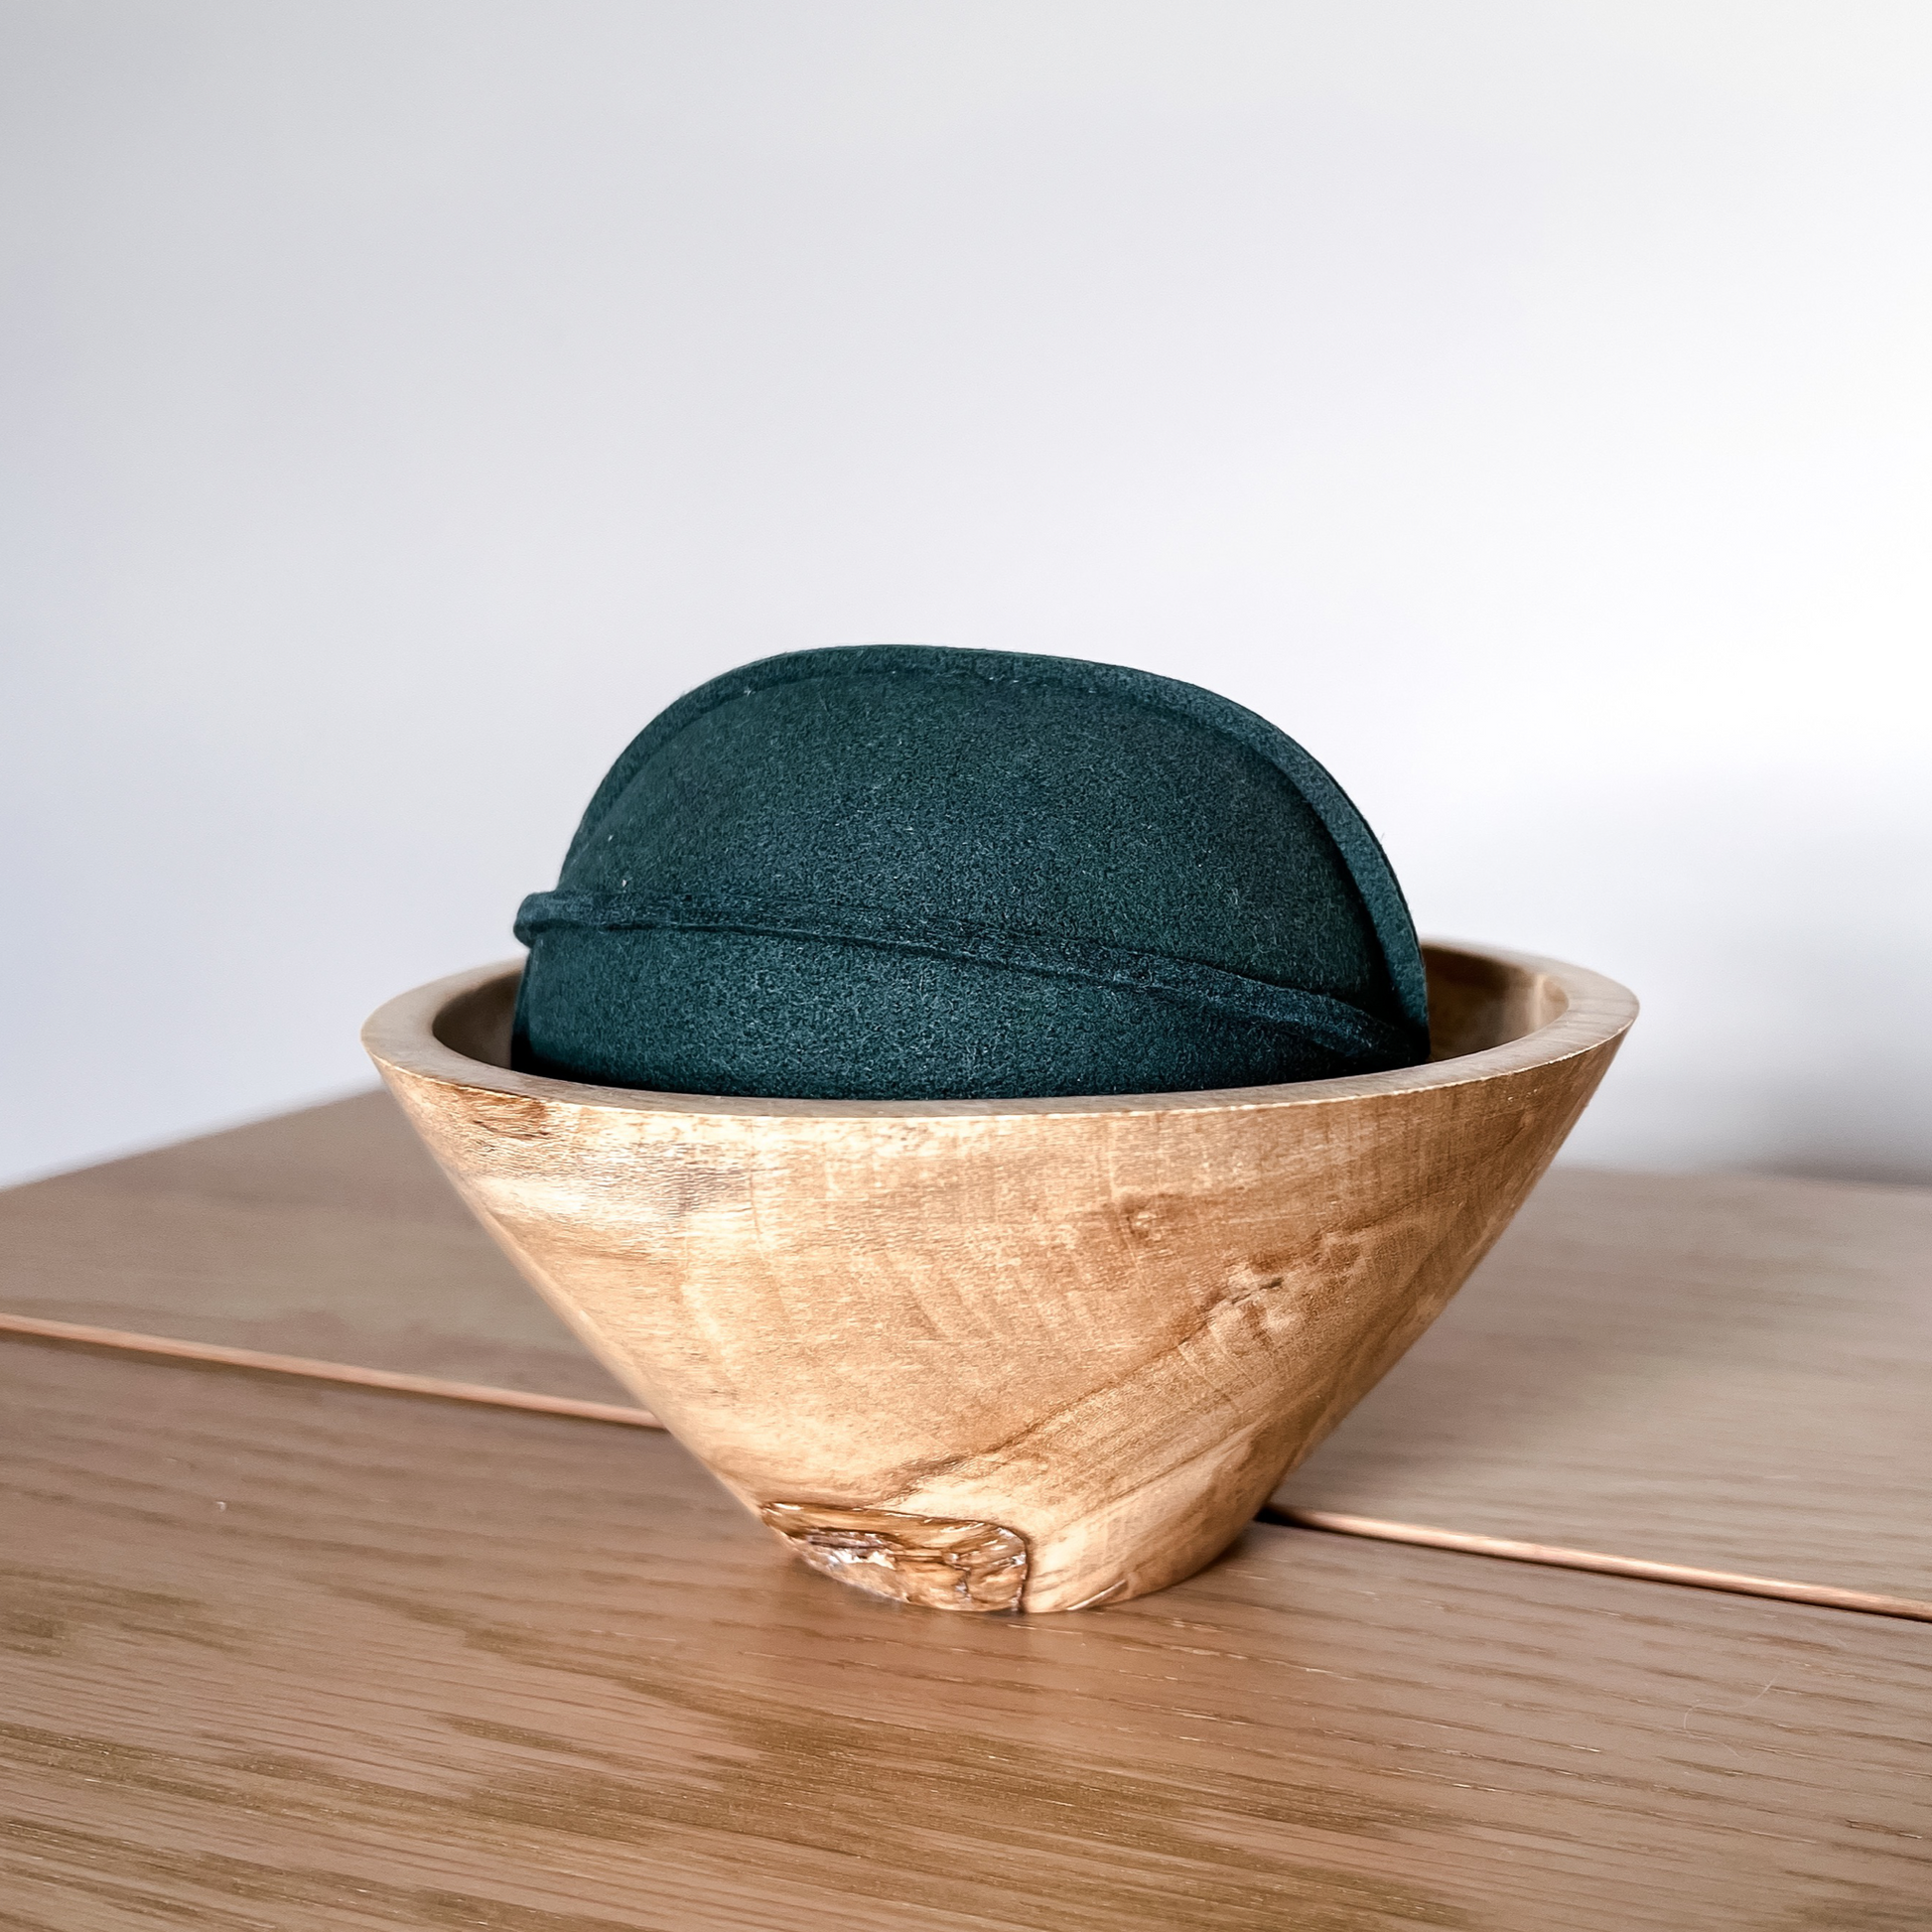 green suede ball dog toy in wooden holder